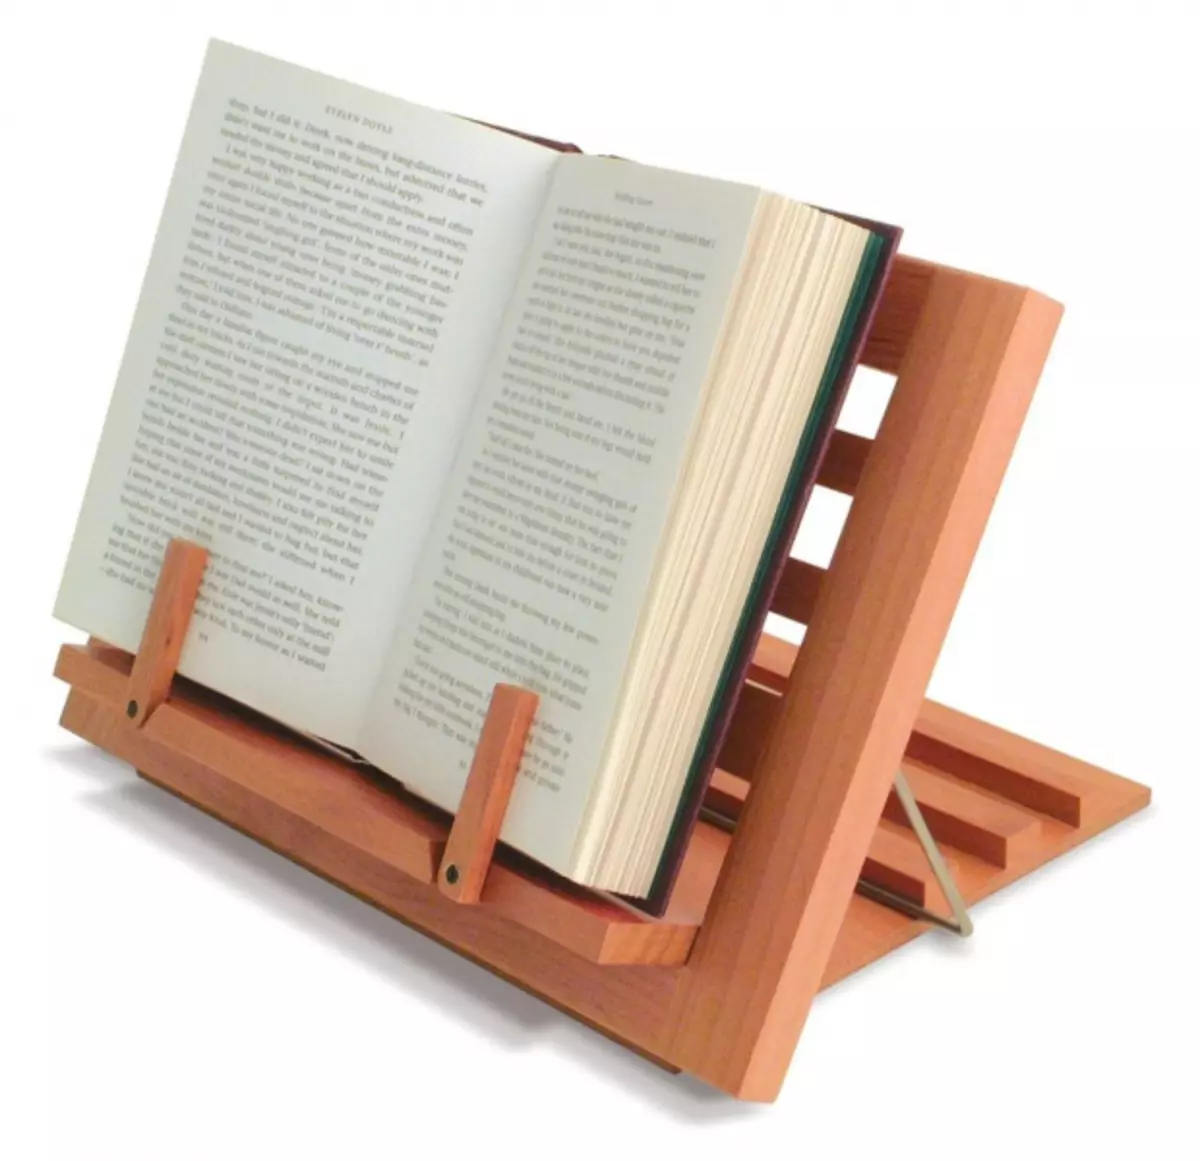 Stand for the book with your own plywood hands and from wire